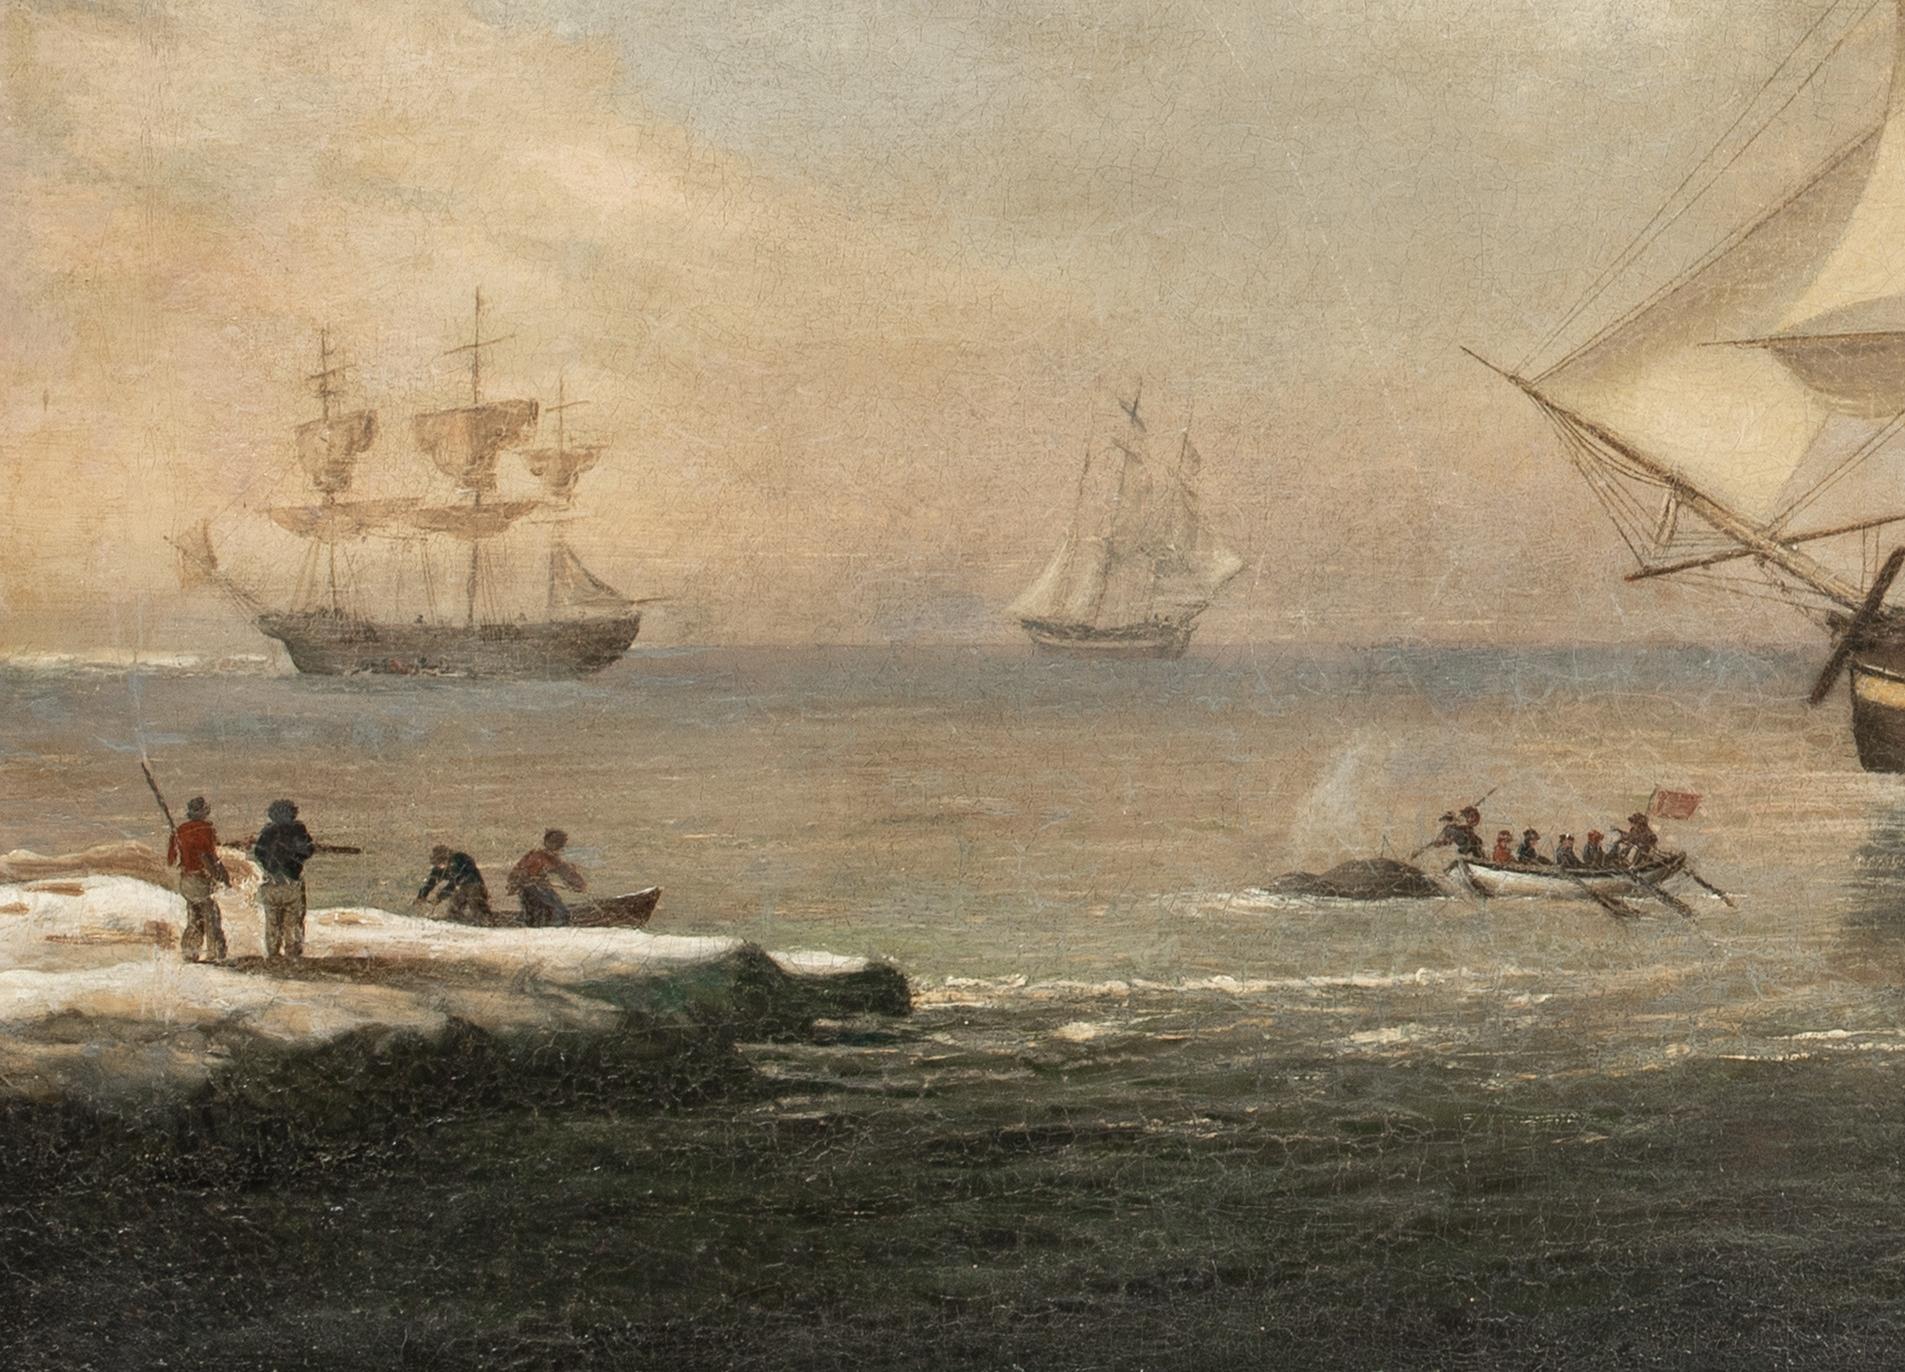 British Ships Whaling In The Artic, 18th Century - Brown Landscape Painting by Robert Willoughby Of Hull